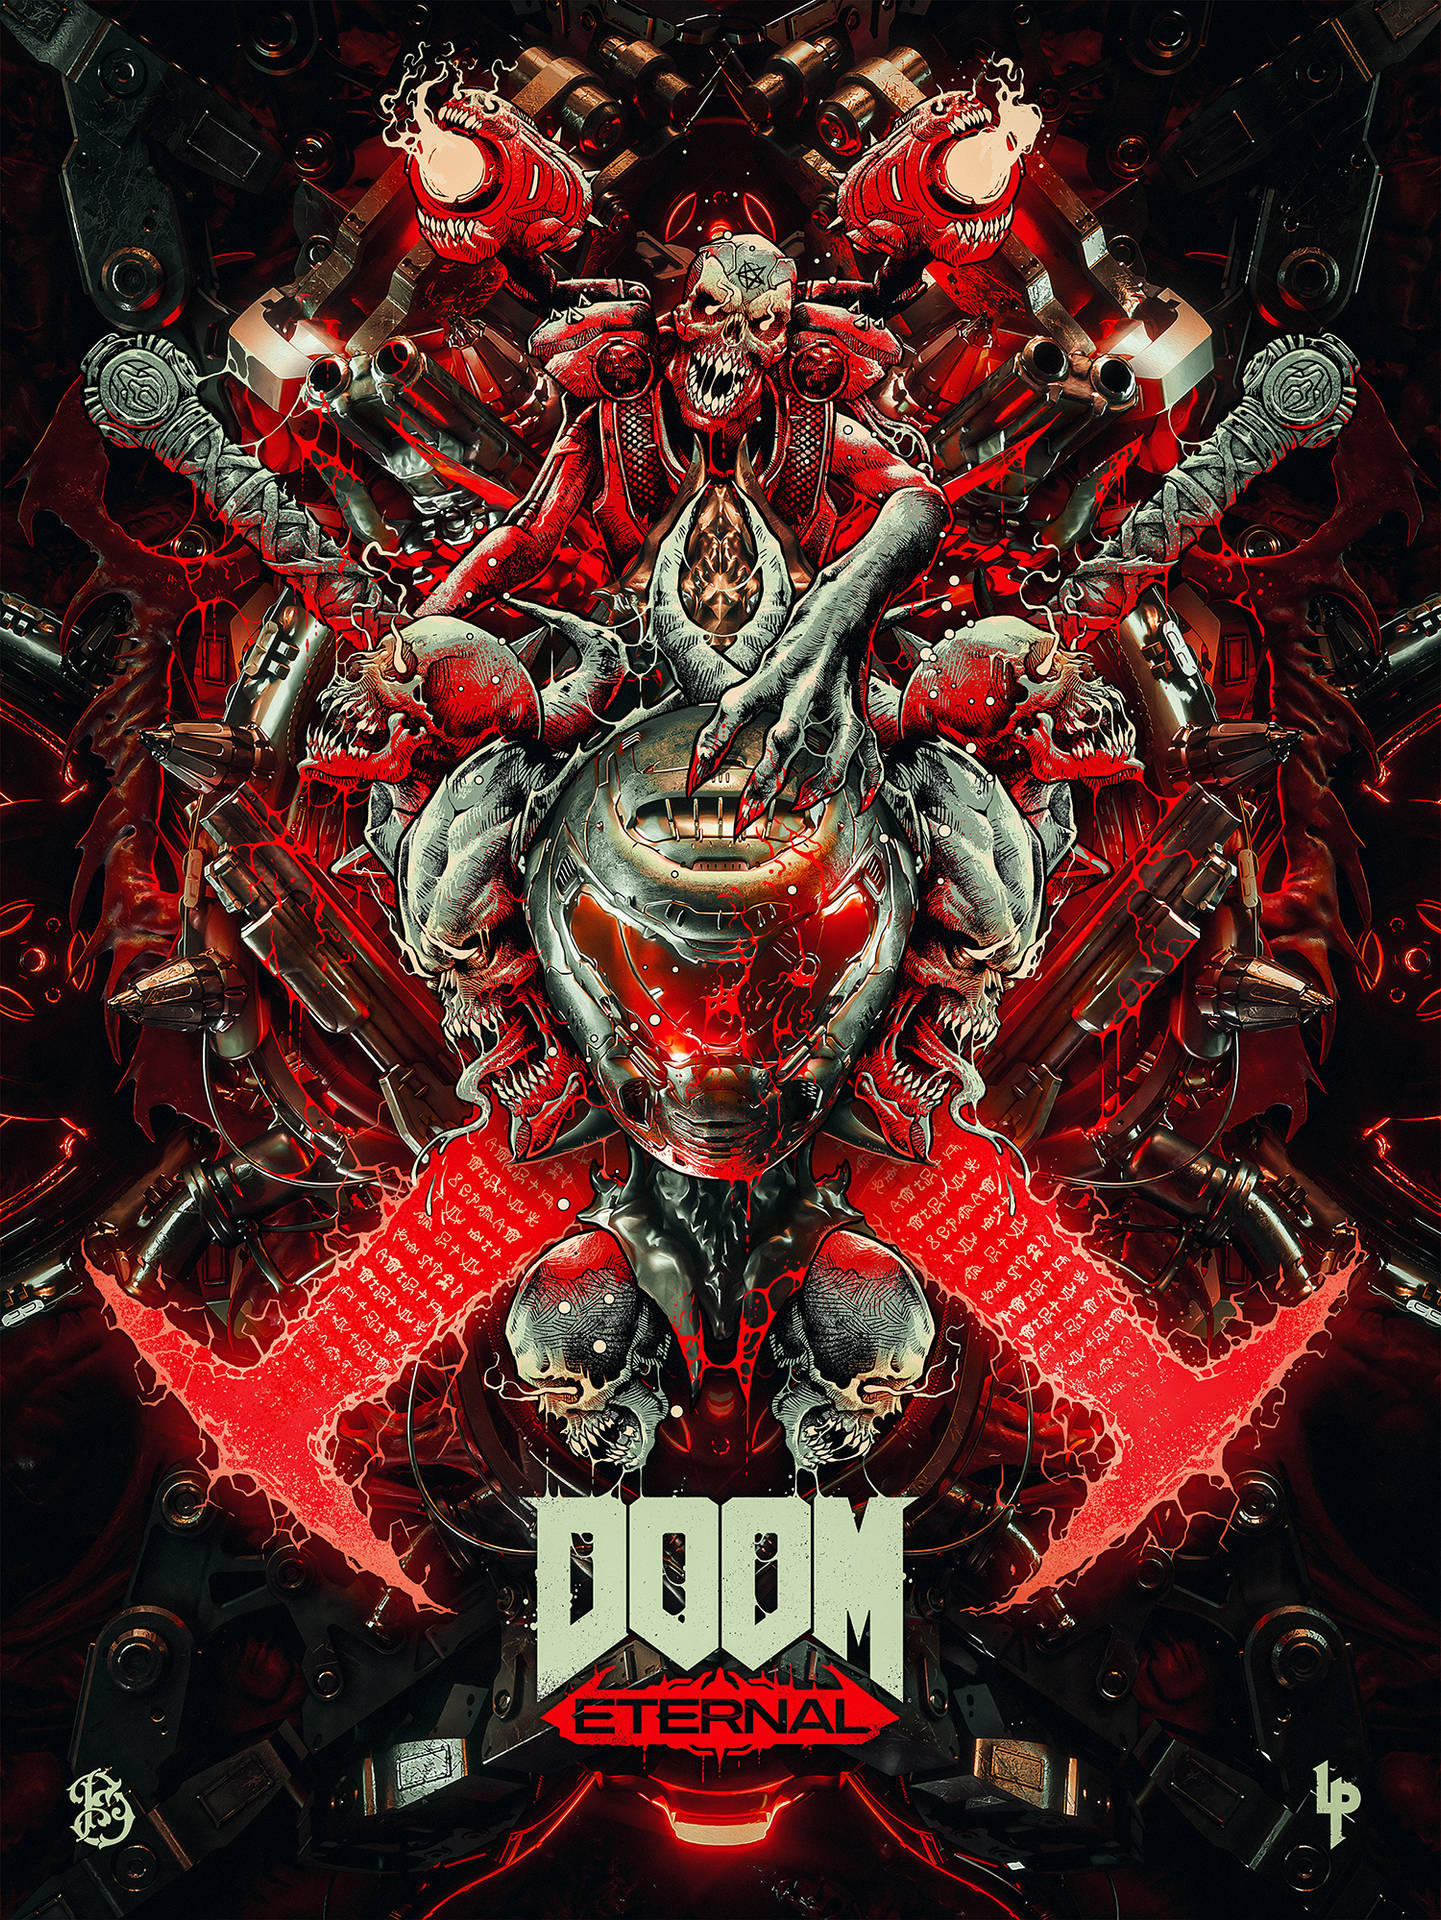 Discover more than 68 doom eternal phone wallpaper best - in.cdgdbentre